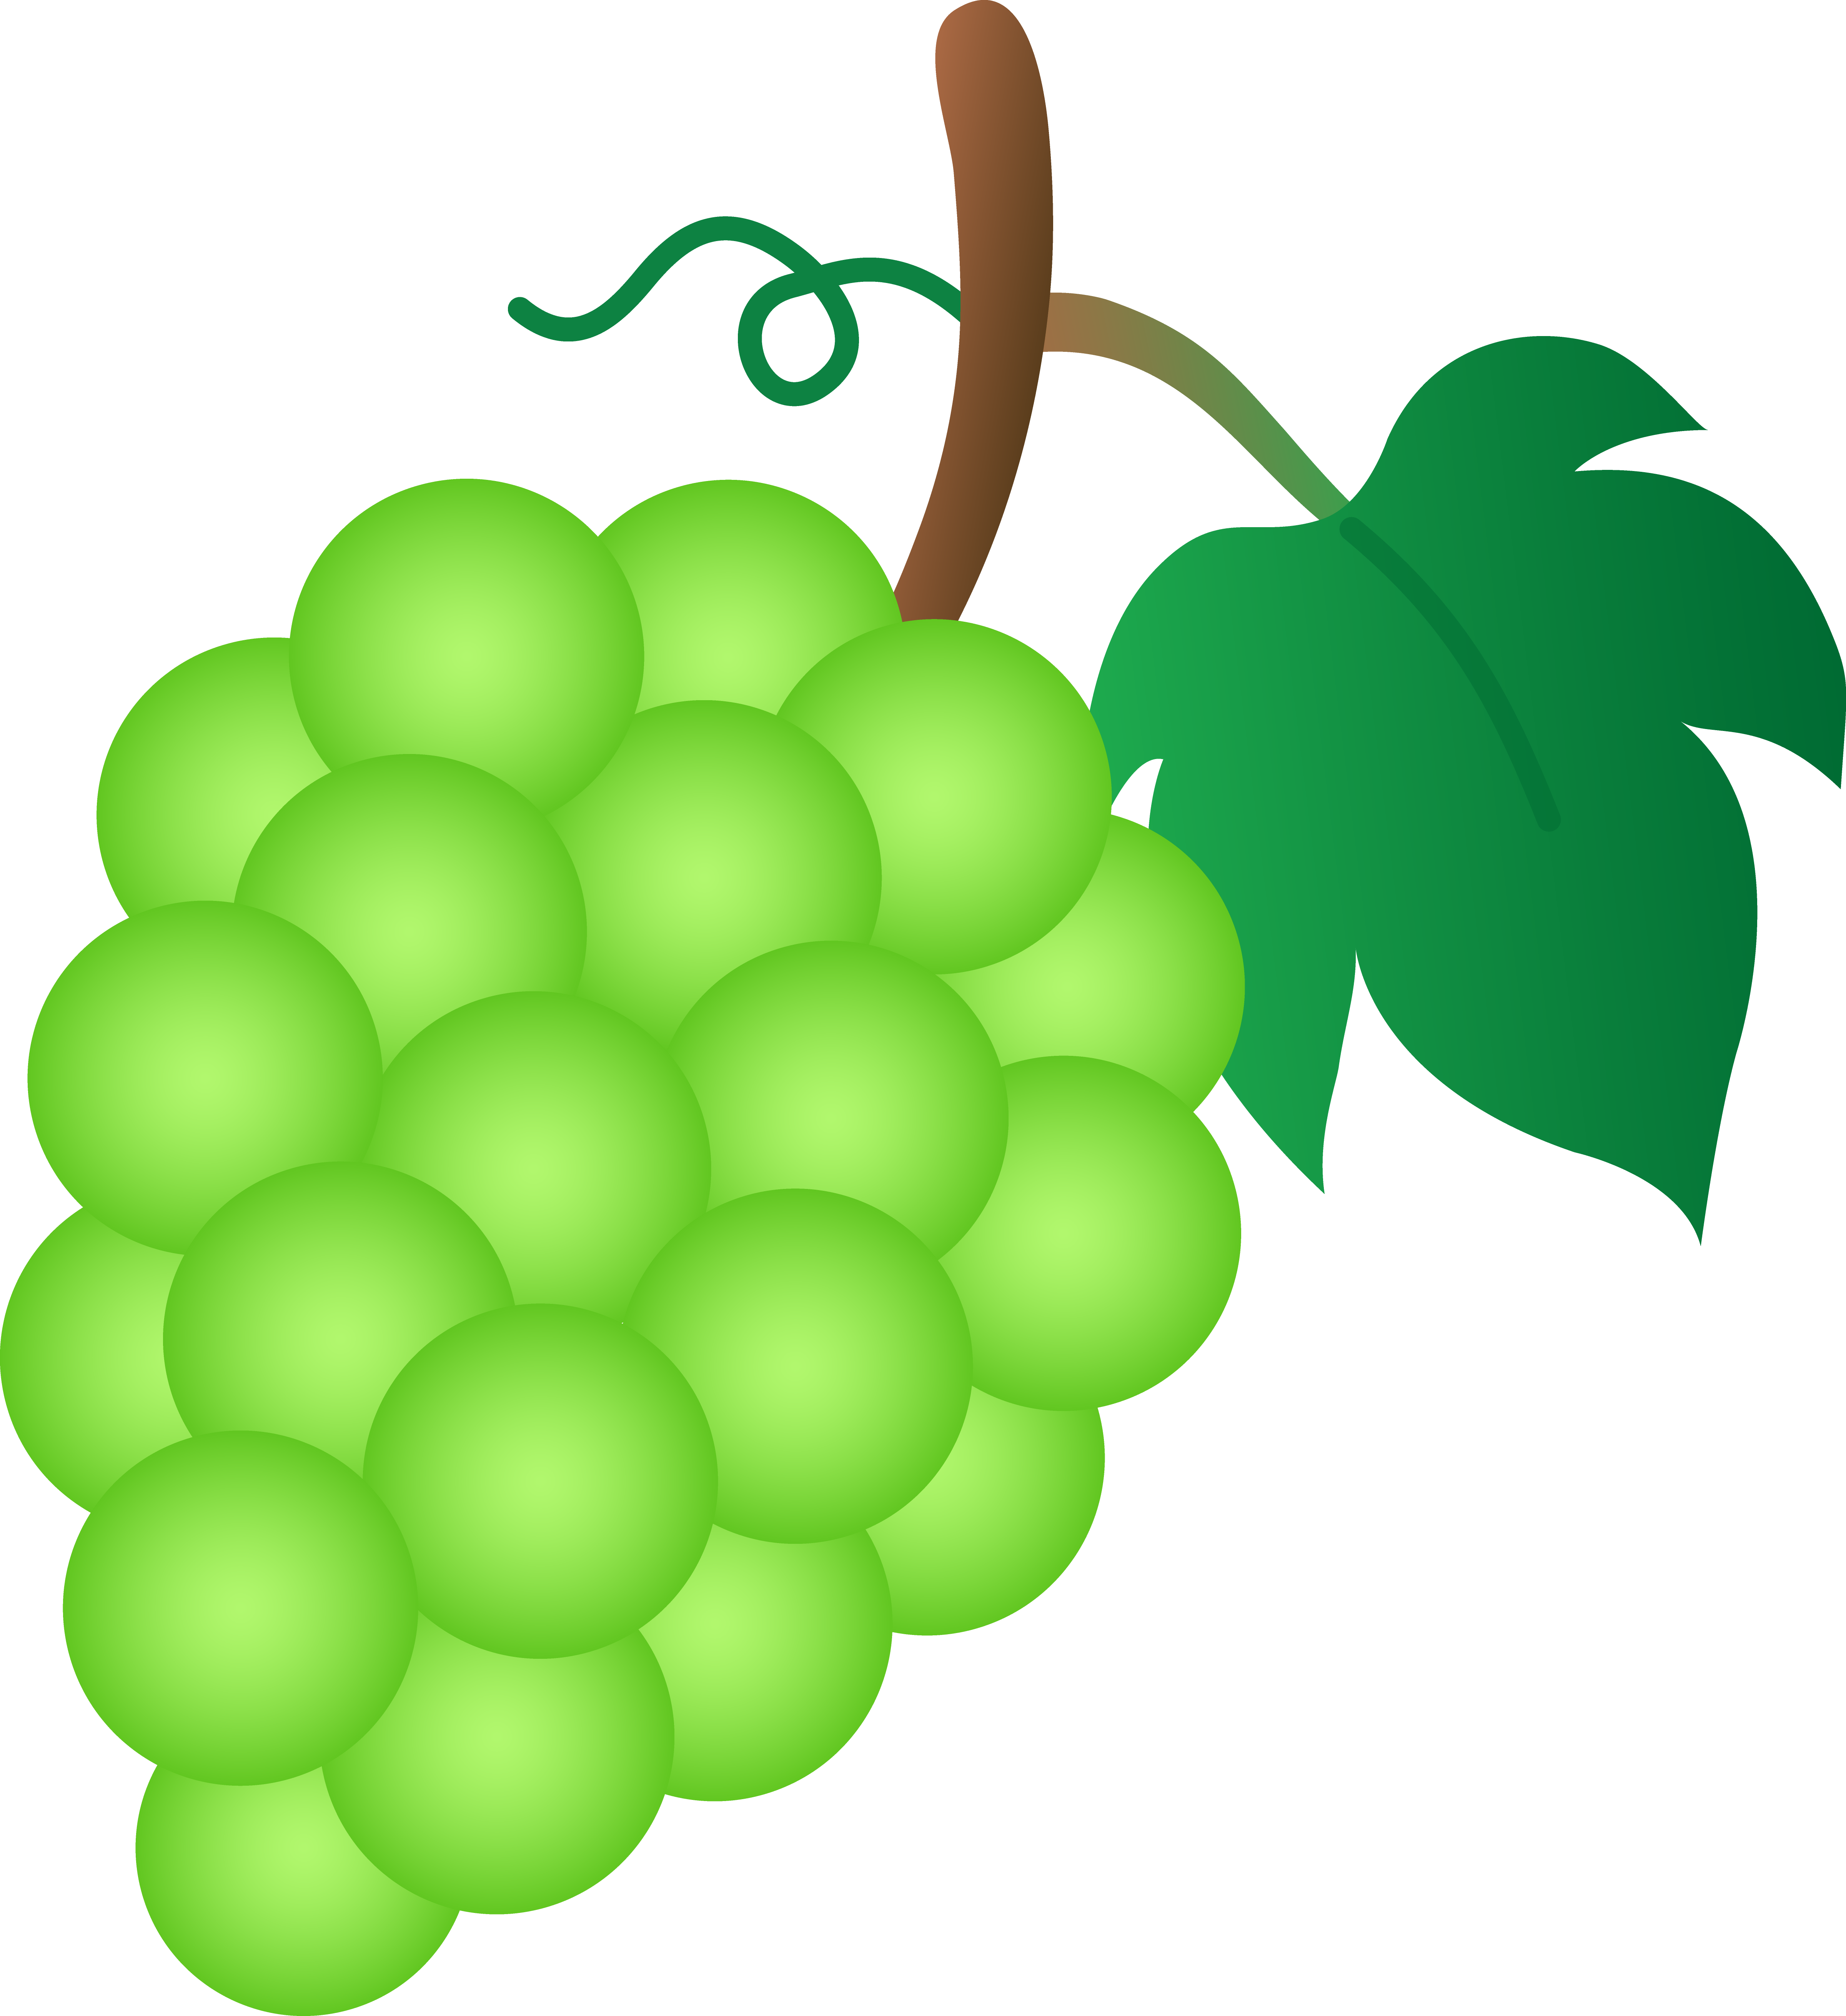 Grapes Clipart Black And White | Clipart Panda - Free Clipart Images